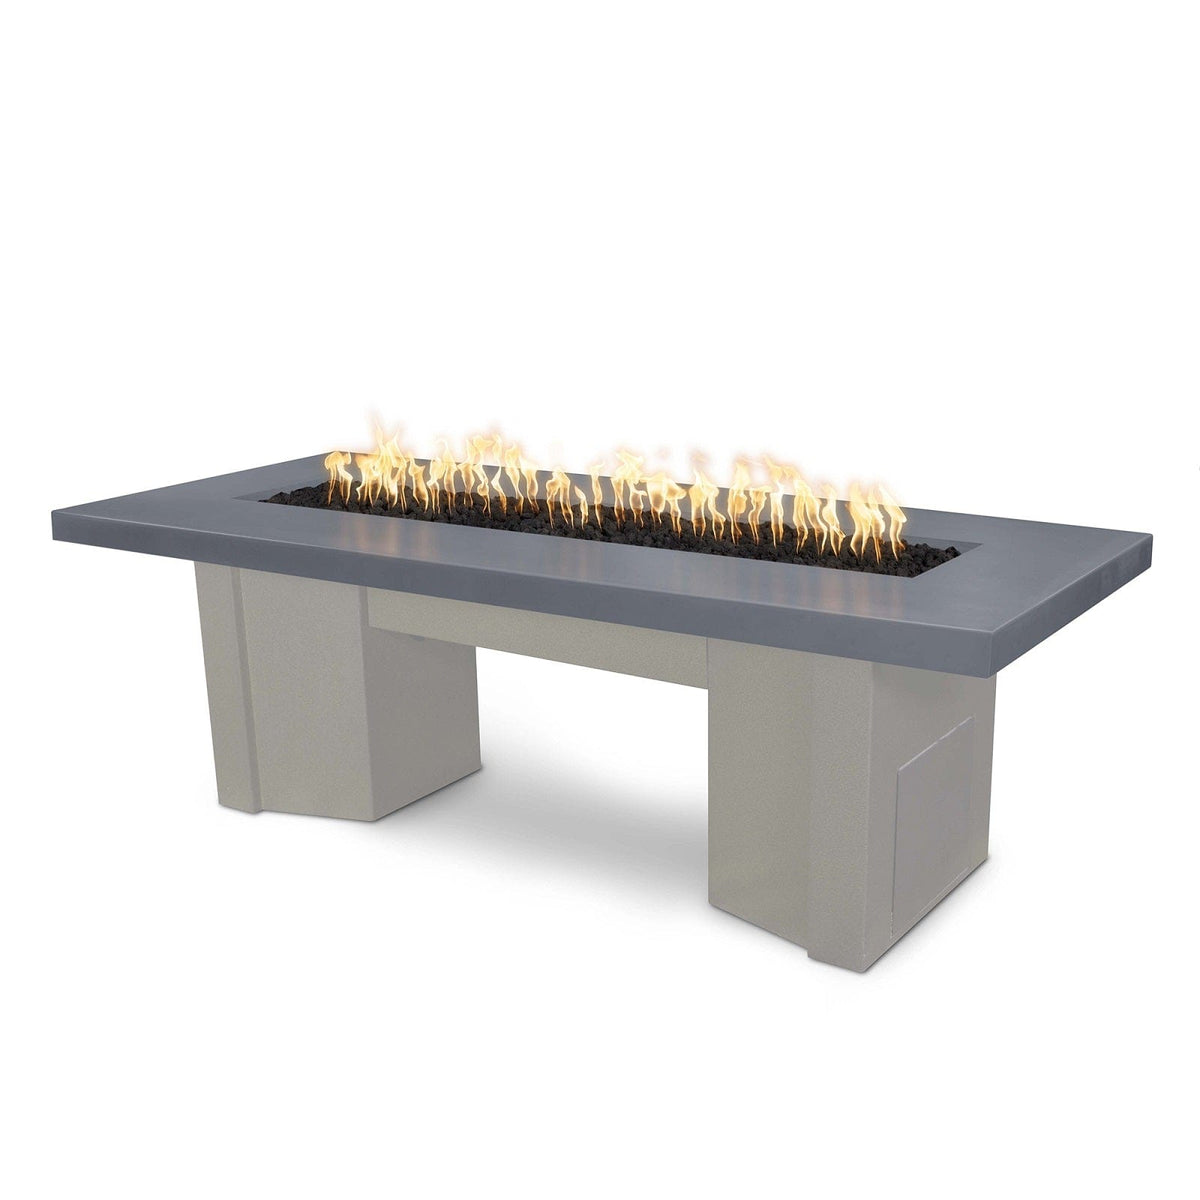 The Outdoor Plus Fire Features Gray (-GRY) / Pewter Powder Coated Steel (-PEW) The Outdoor Plus 60&quot; Alameda Fire Table Smooth Concrete in Liquid Propane - Match Lit / OPT-ALMGFRC60-LP